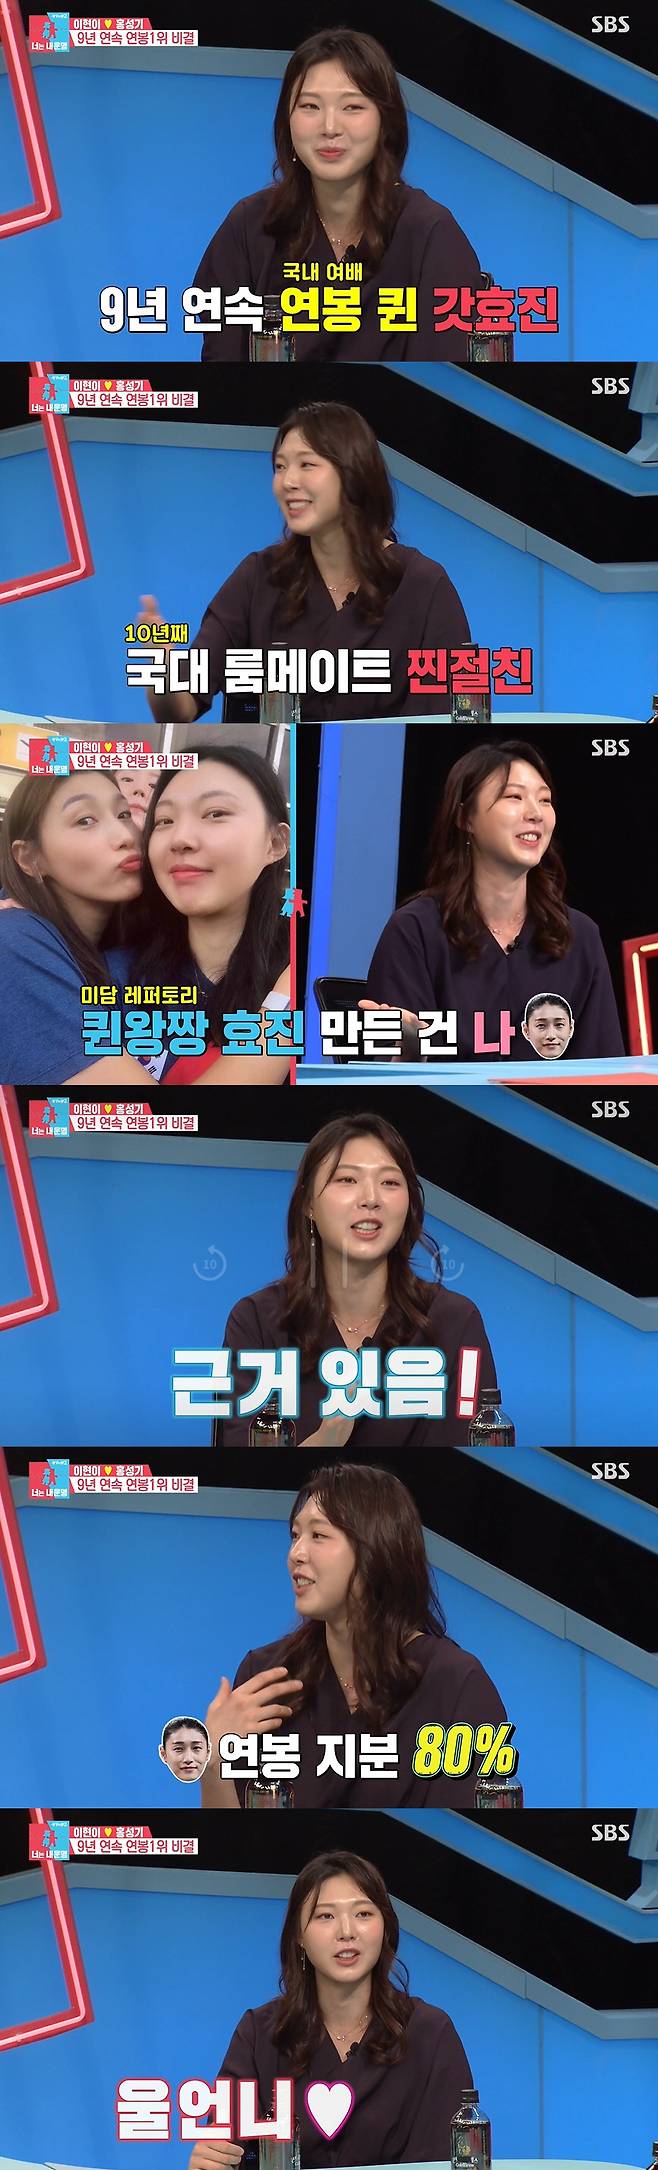 Volleyball player Yang Hyo-jin reveals his love story with Husband and reveals his affection for his senior Kim Yeon-koung.Yang Hyo-jin appeared as a special MC on SBS Sangsangmong Season 2 - You Are My Destiny broadcast on the 20th.Yang Hyo-jin, who marriages in April, asked about his honeymoon life, saying, I did not see Husband at all because of marriage and Tokyo Olympics.Then, a wedding picture of Yang Hyo-jin, which became a hot topic, was released. Yang Hyo-jin, a 190-cm tall man, admired the long dress as a goddess.When asked about Husbands height, Yang Hyo-jin replied, Its 182cm, honestly, its a big persons height, but its a little bit like it if youre next to me.As for Husbands personality, I am very sensitive to my personality. When I look at it, I look really sensitive.But Husband has a lot of personality, its like a bear, its a full-on style, he said.Yang Hyo-jin, who met Husband, a 4-year-old civil servant, on a blind date, said, I have a personality that is different from what I see.I have to do it quickly when I work, and Husband is a relaxed style. So I think I have to make a conclusion by taking a thumb for three to four months. He said, Husband takes me to the hostel by car, and I thought about this a hundred times.I feel good about each other, but I do not tell you clearly, so when I went to ask, What are we like, there was a static. I knew that I was going to be Confessions to me when I arrived, but I could not bear it and I was in a hurry. Meanwhile, Yang Hyo-jin said that the reason why he was able to keep the title of Salary Queen for domestic women volleyball for 9 years was thanks to his senior Kim Yeon-koung.Kim Sook said, Kim Yeon-koung said that he made Yang Hyo-jin into Salary Queen and said that he was self-promoting.Yang Hyo-jin said, Yes, when I go out, I start with my acquaintances and tell my foreign bishop that I made me Salary Queen.But frankly, I do not have a stake. I have learned a lot from the same room.I think there is 80% stake, he expressed his respect and affection for Kim Yeon-koung.